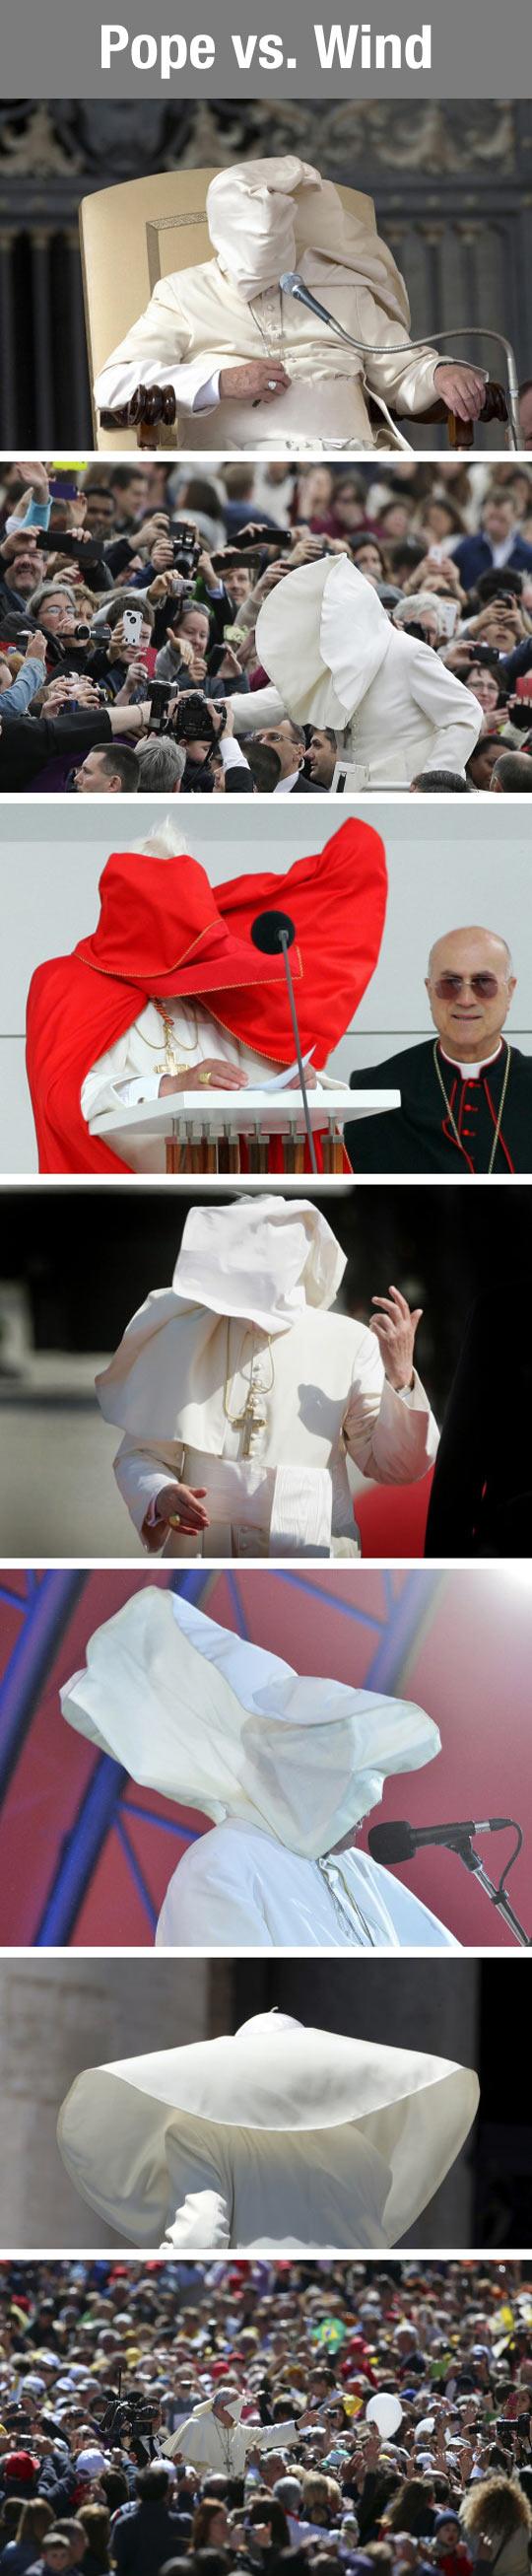 Pope vs The Wind of God.